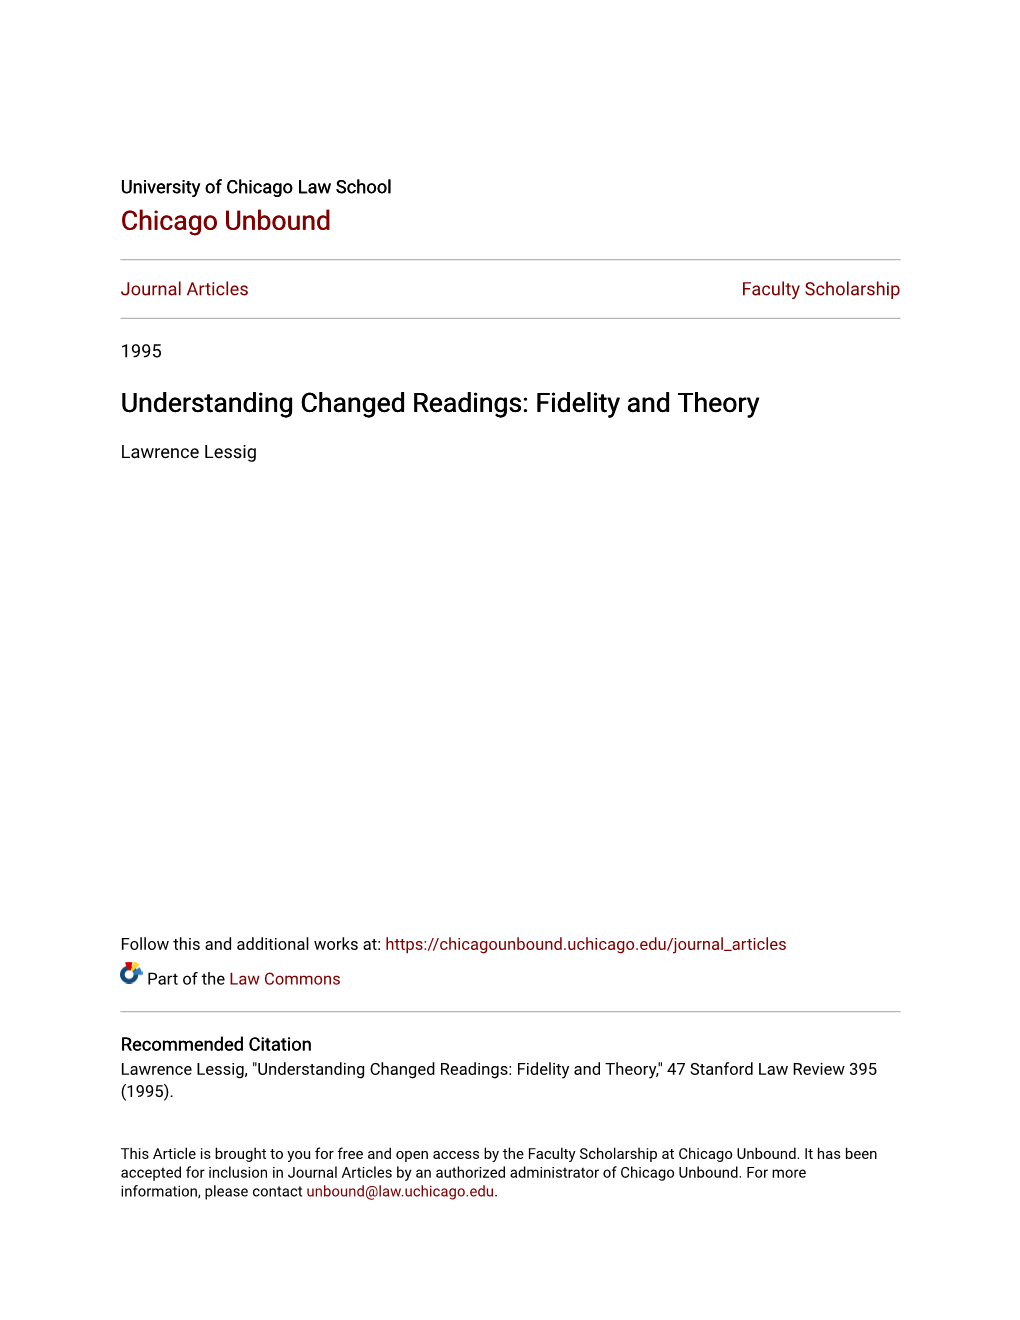 Understanding Changed Readings: Fidelity and Theory